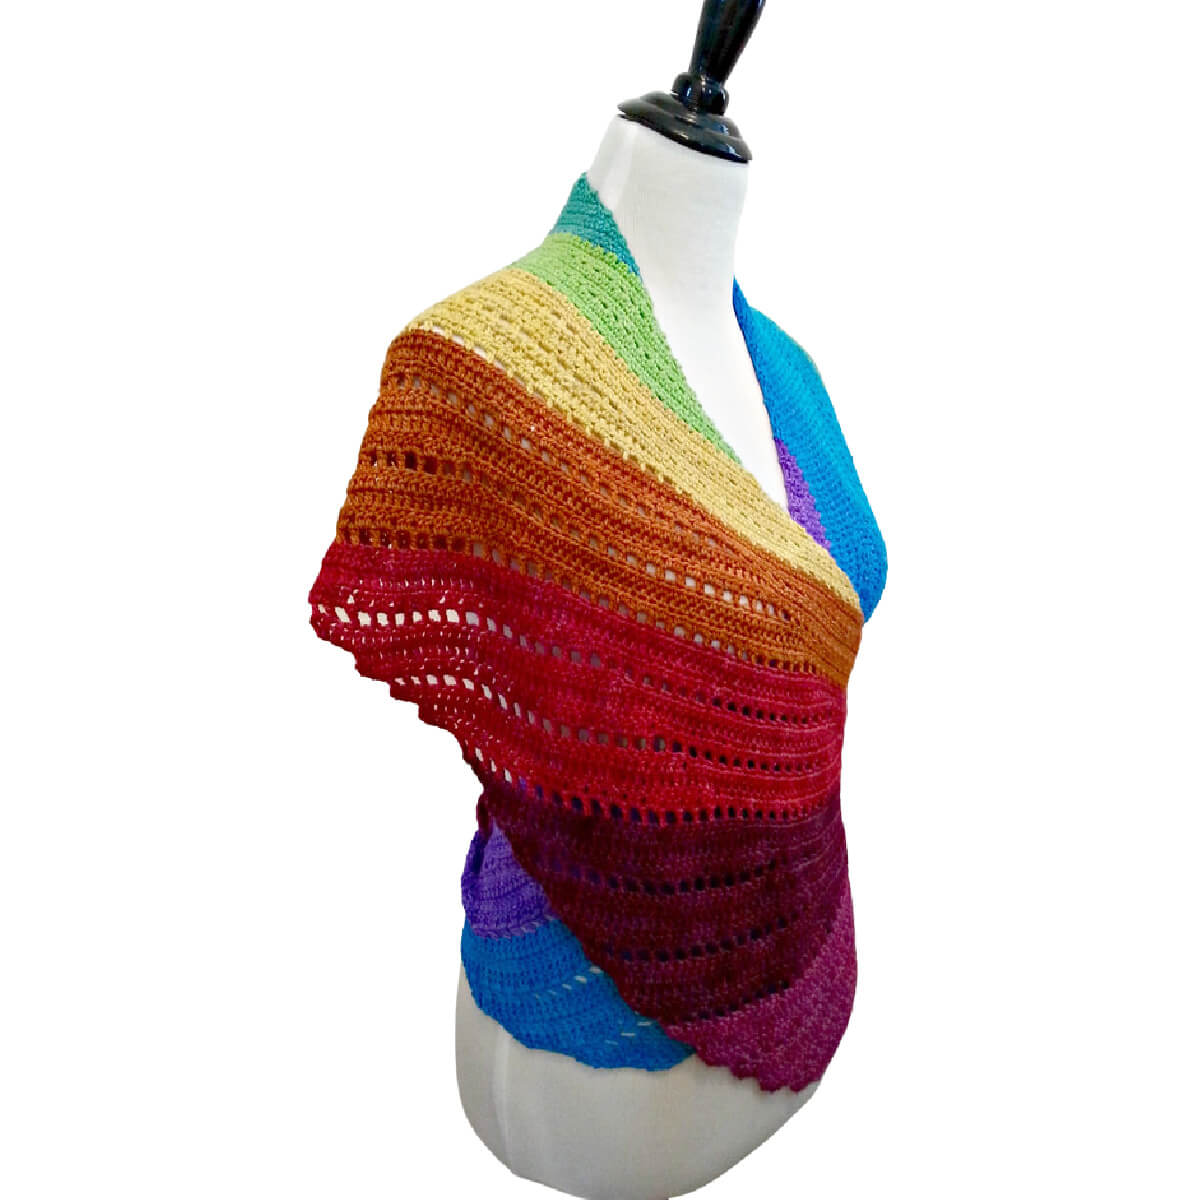 Front side view of a dress form torso. Wrapped around its shoulders then behind its back in a way that resembles a top is a curved long crochet wrap or shawl resembling a bird wing in rainbow colors starting with purple and ending with blue.